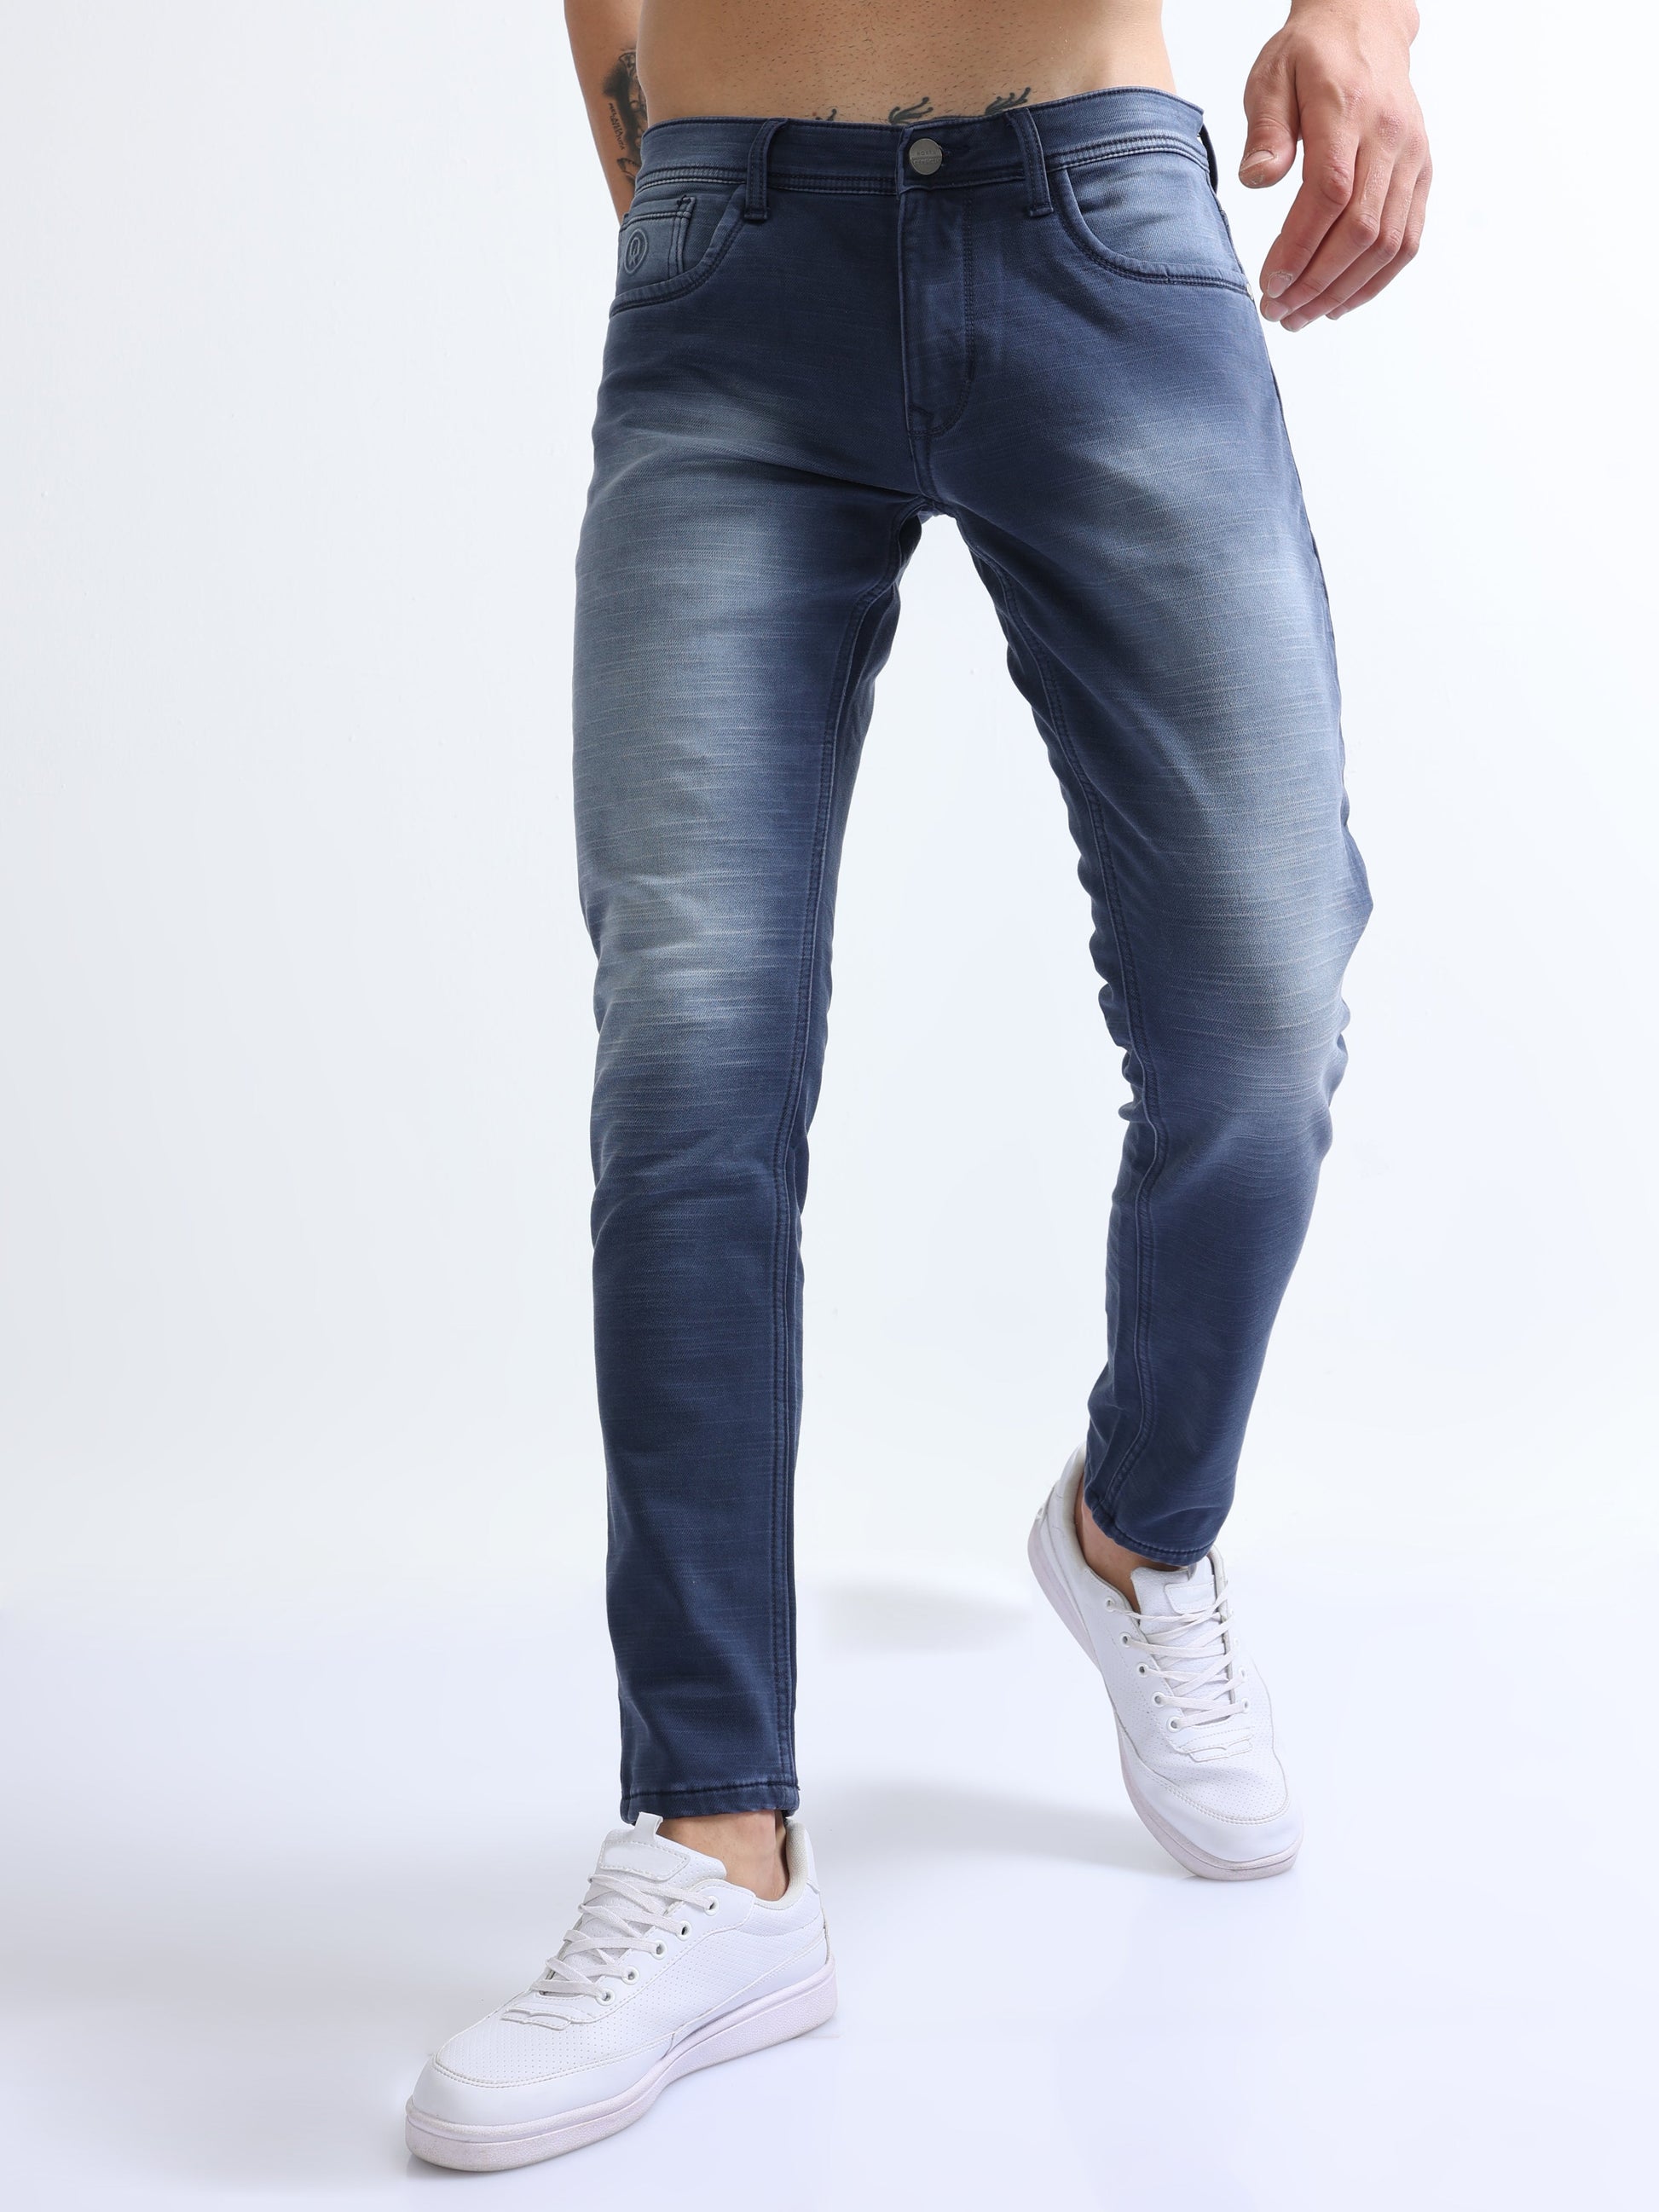 Buy Colored Textured Jean Online